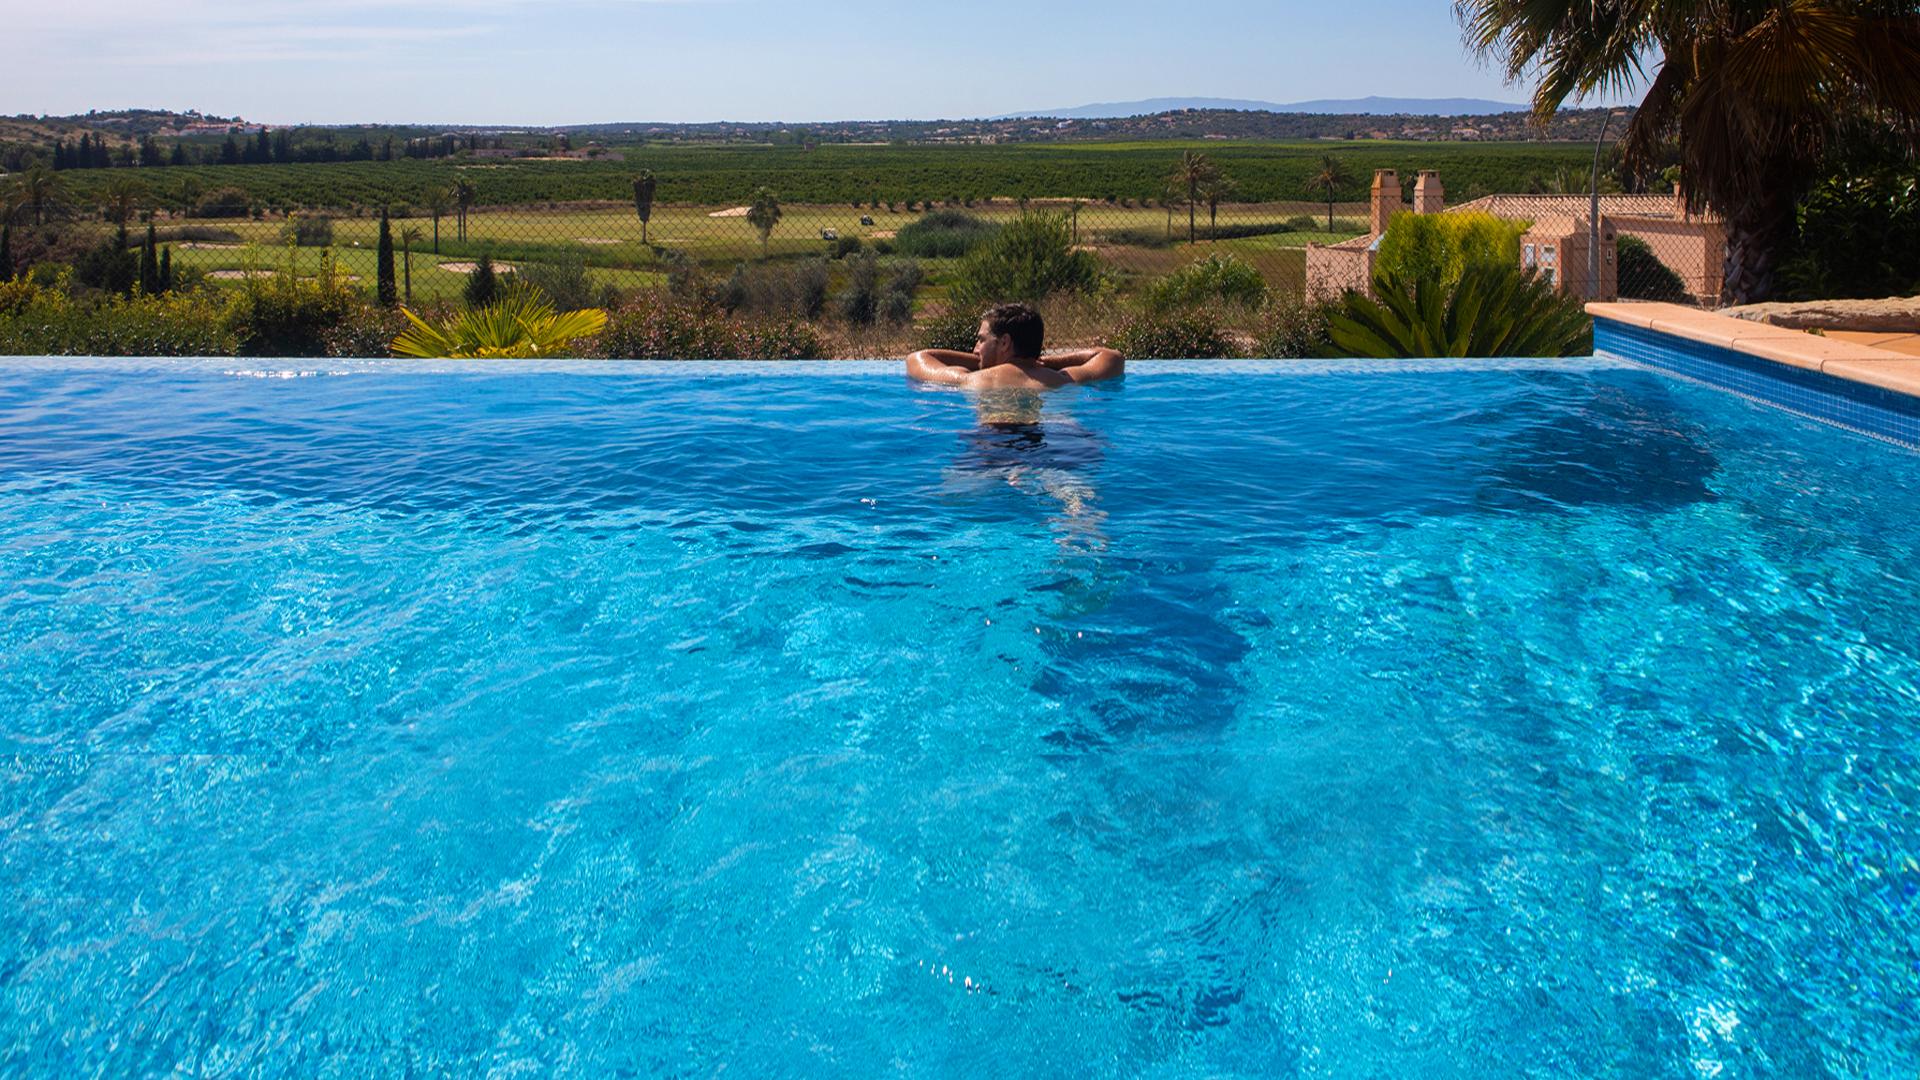 Living in the Algarve: 5 Reasons to choose our Villa with a private pool